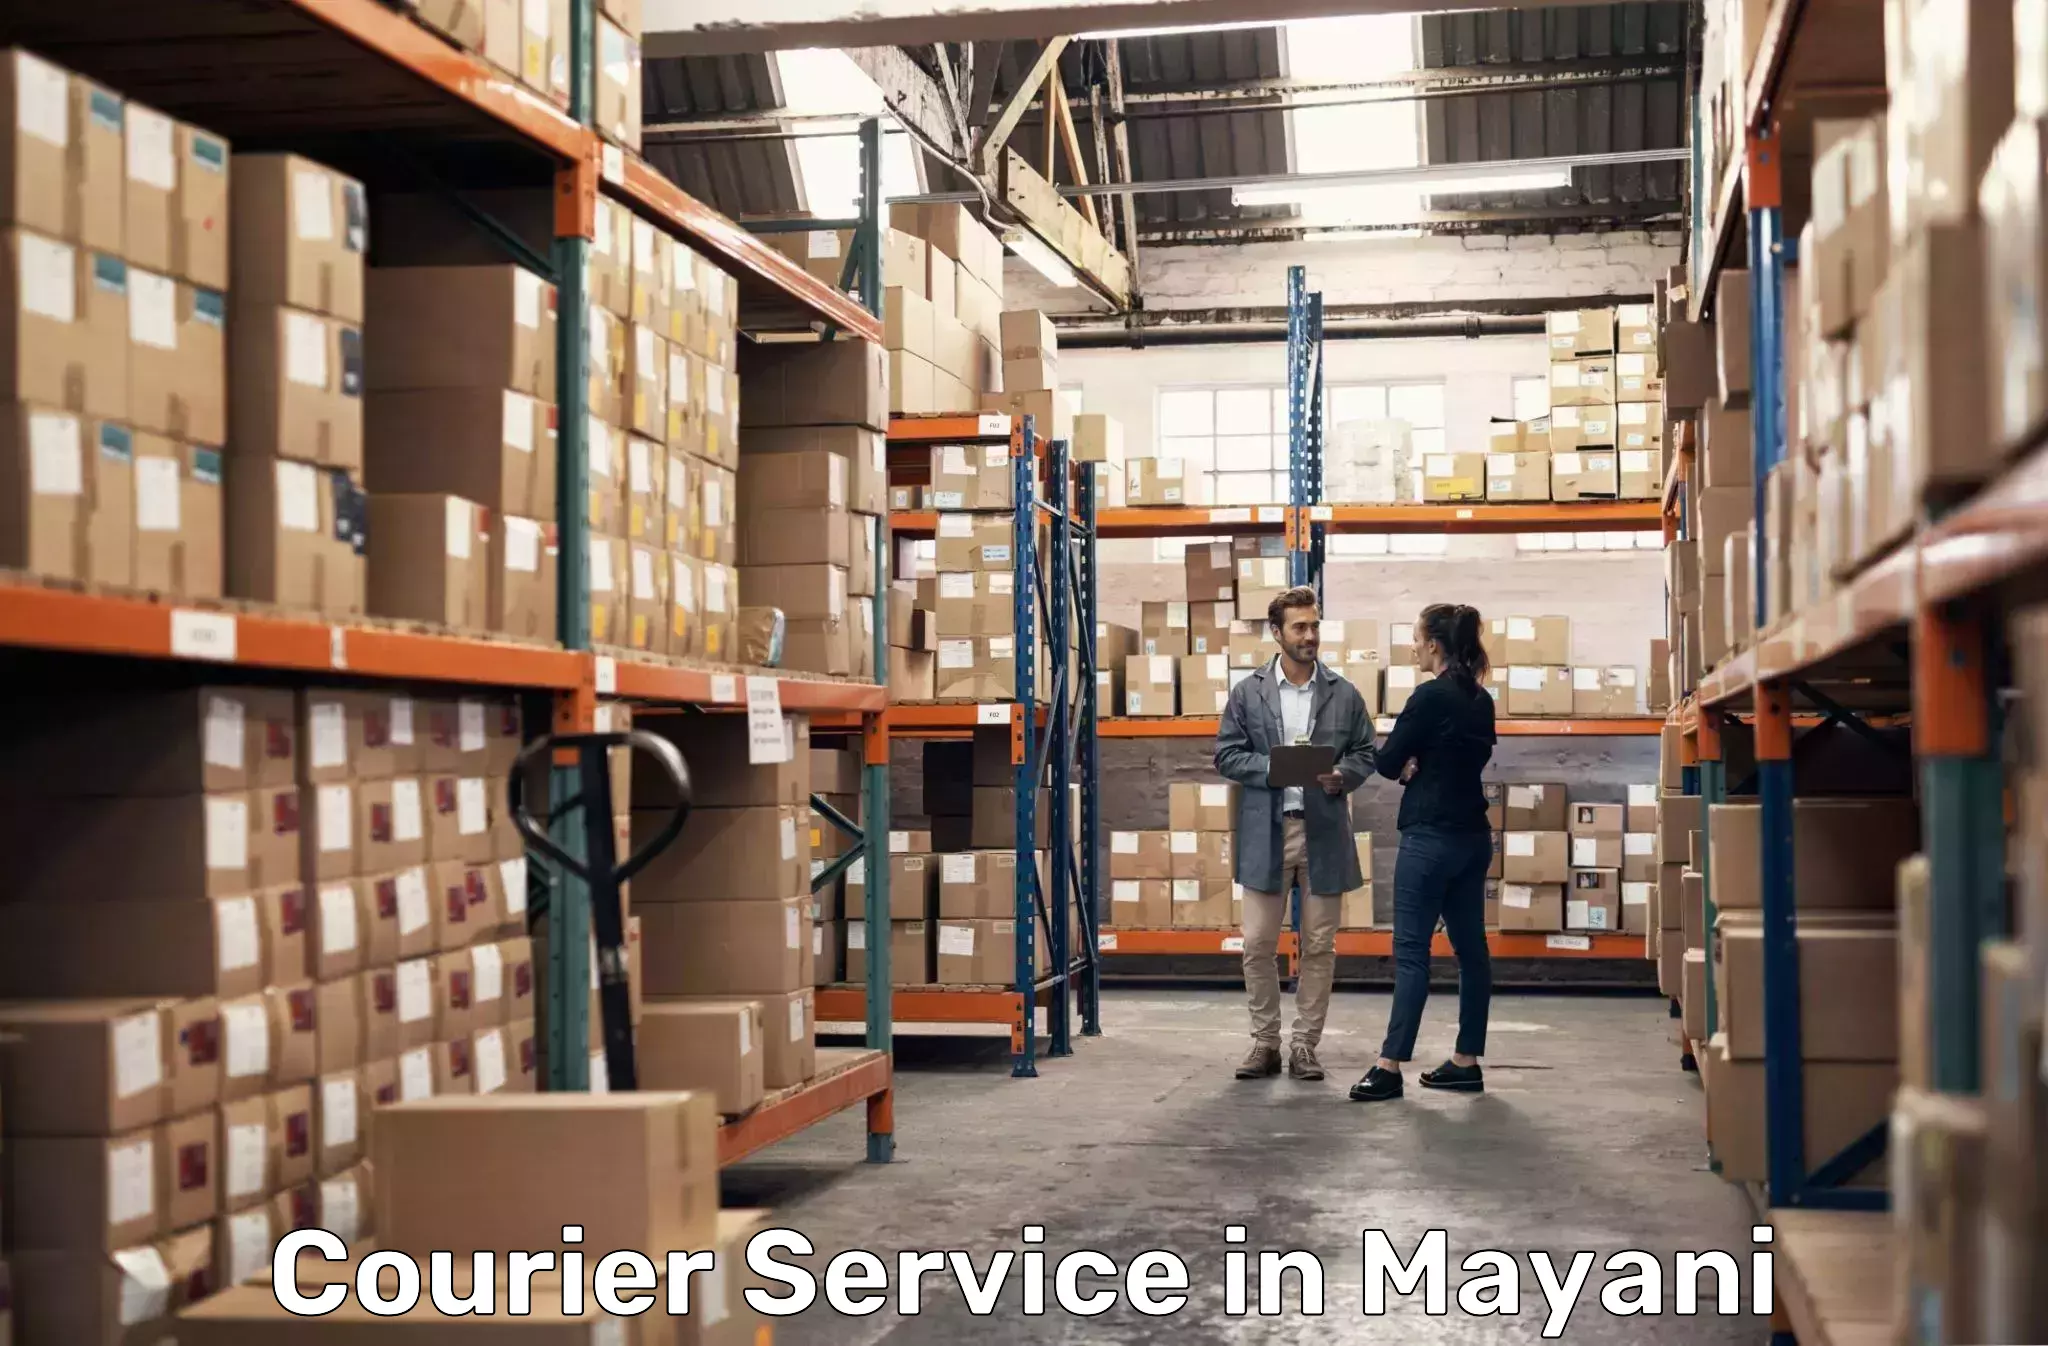 Same-day delivery options in Mayani